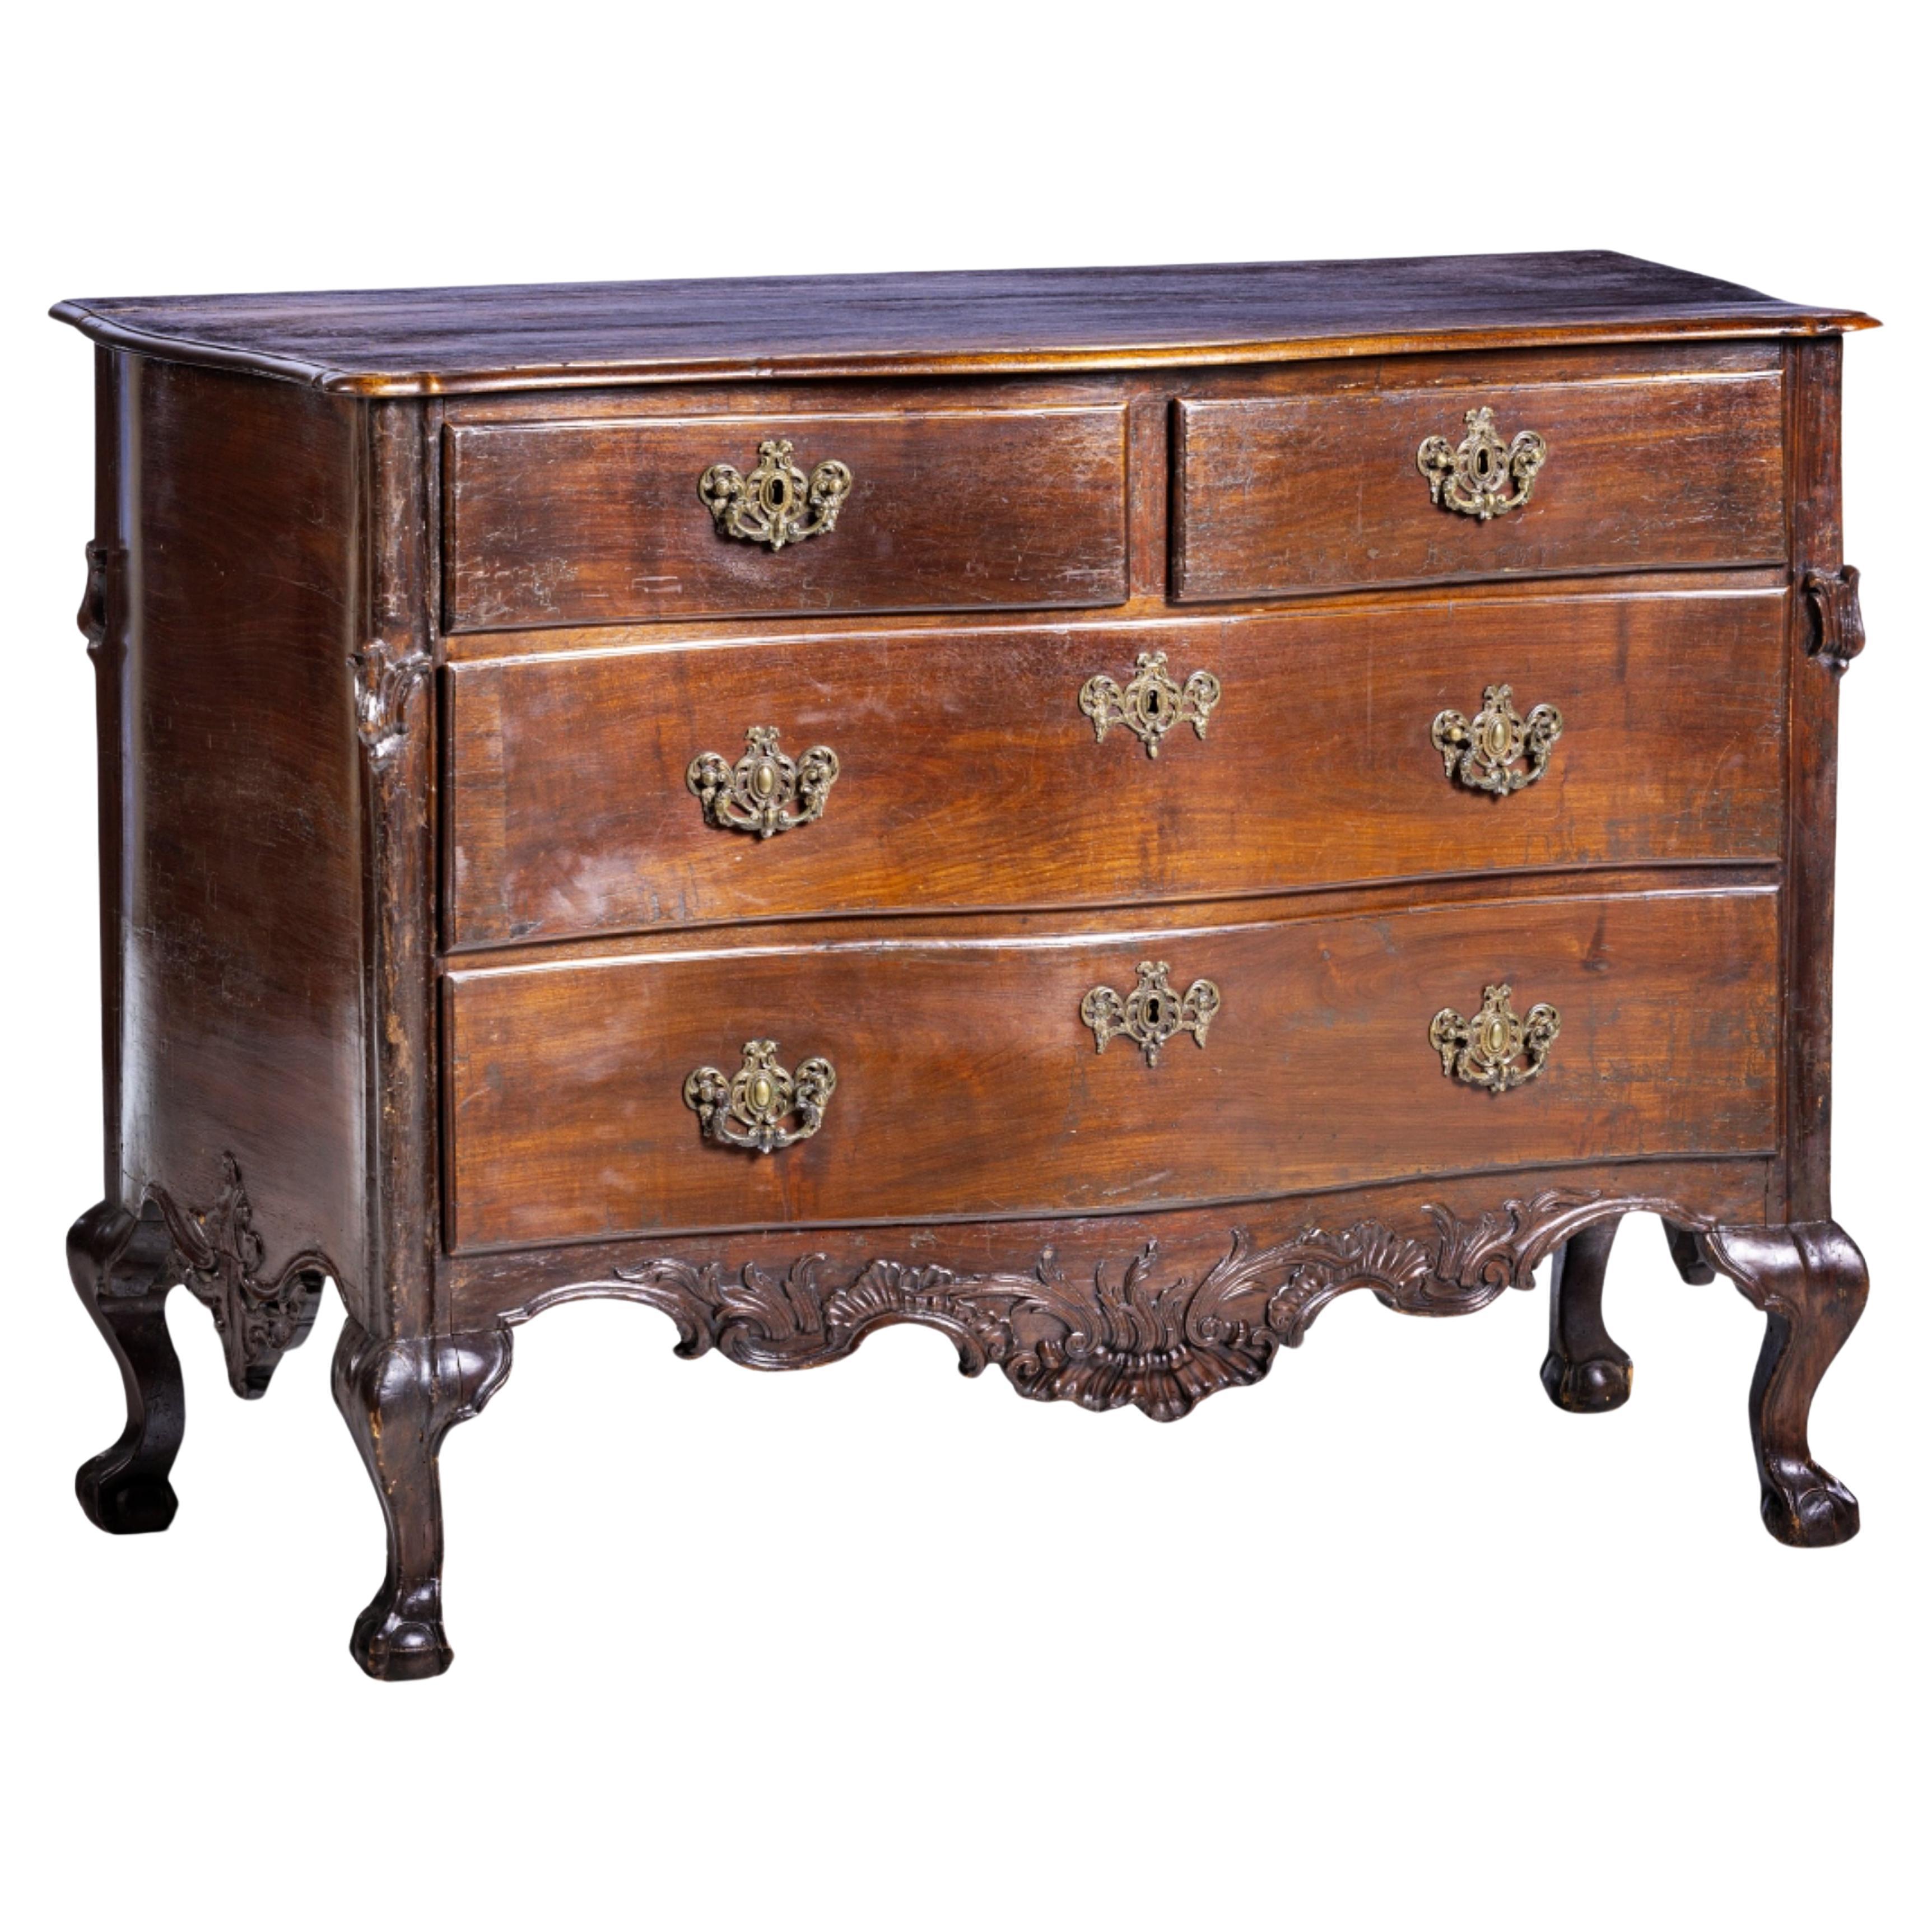 PORTUGUESE CHEST OF DRAWERS 18th Century